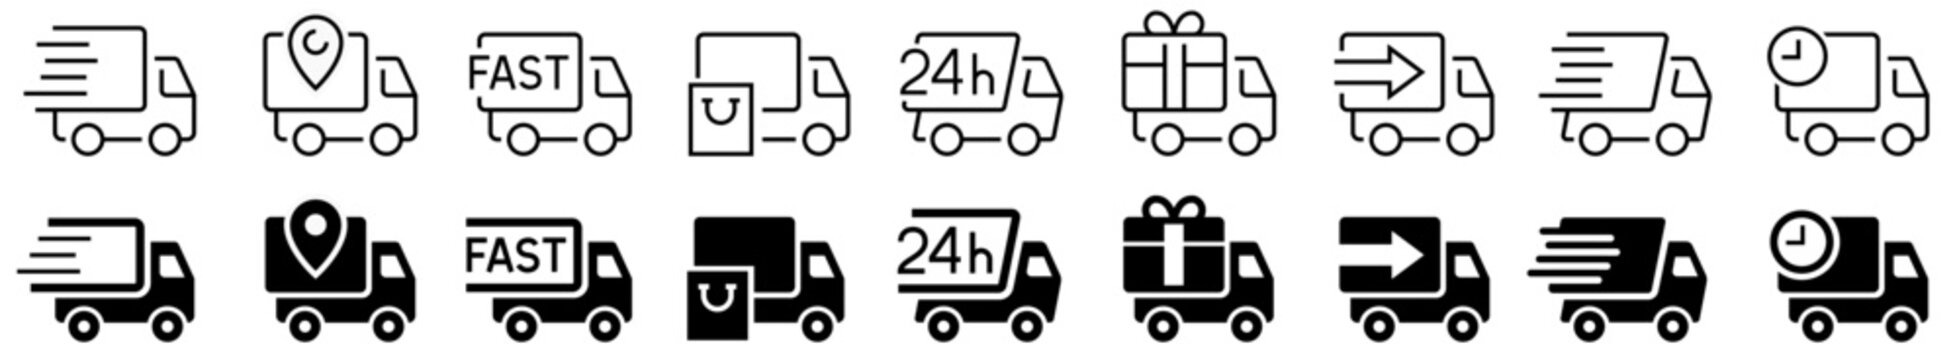 Delivery Truck icon set. Logistic trucking sign. Delivery flat and line icons. Editable vector. Vector illustration.